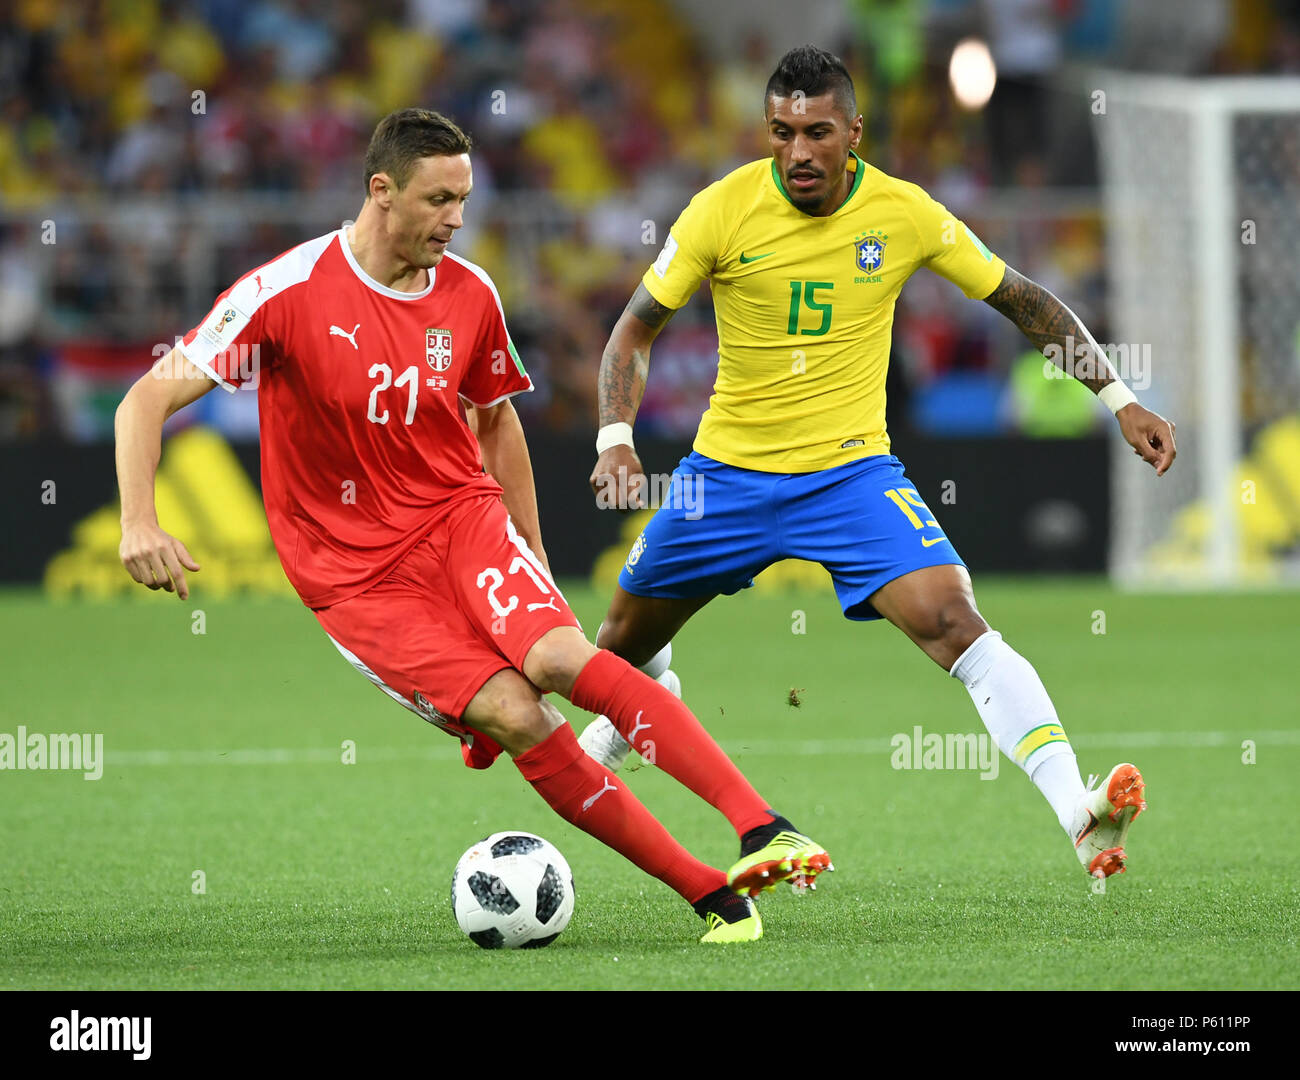 Moscow, Russia. 27th June, 2018. Paulinho (R) of Brazil vies with Nemanja Matic of Serbia during the 2018 FIFA World Cup Group E match between Brazil and Serbia in Moscow, Russia, June 27, 2018. Credit: Du Yu/Xinhua/Alamy Live News Stock Photo